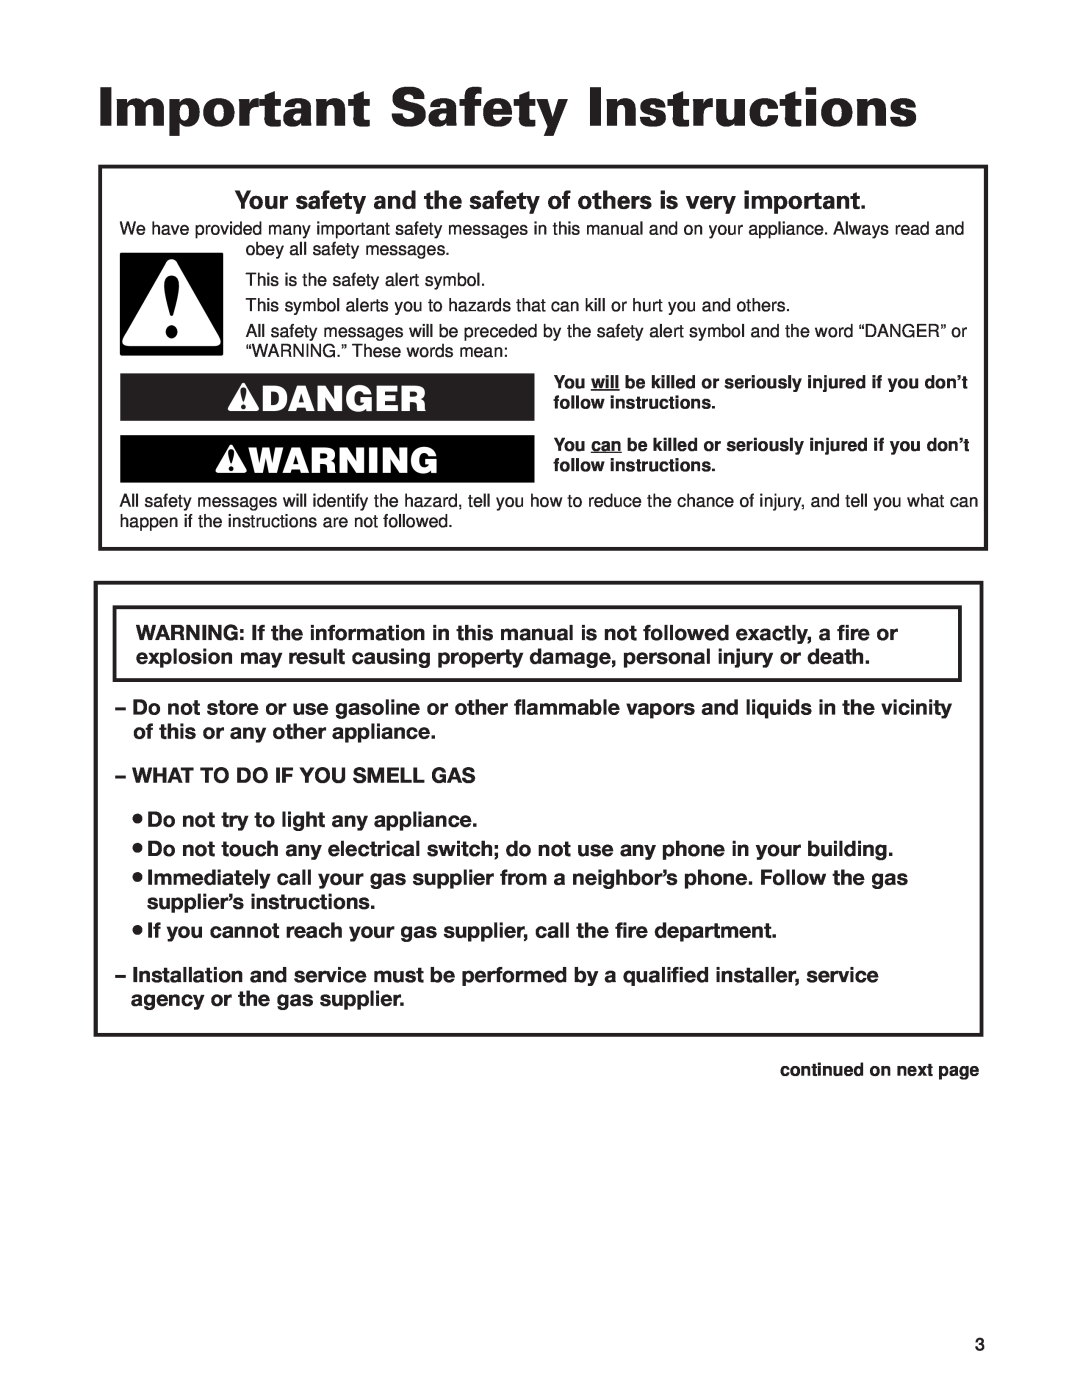 Whirlpool GLT3014G Important Safety Instructions, wDANGER wWARNING, Your safety and the safety of others is very important 